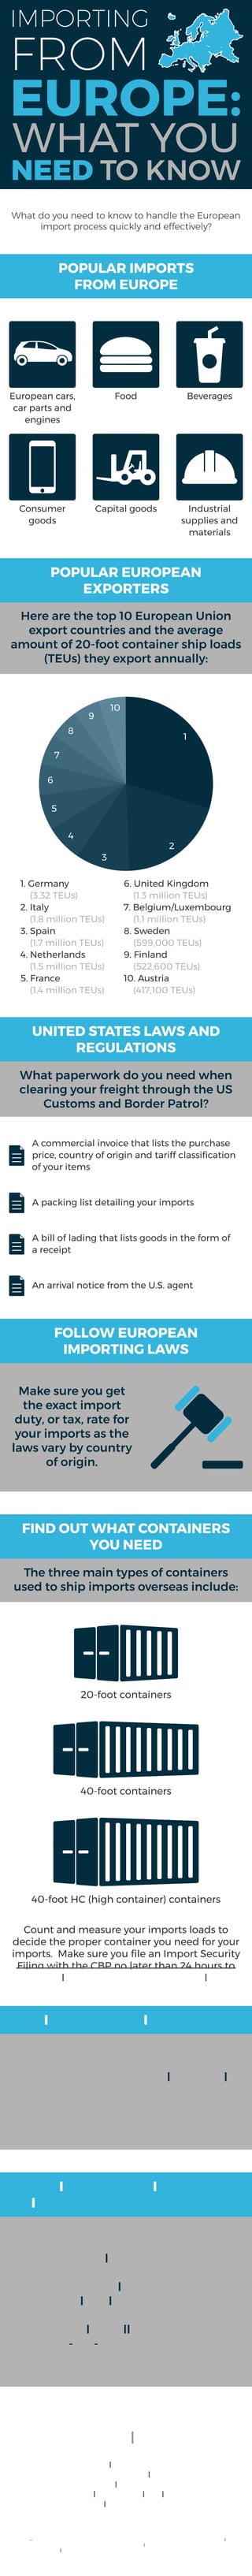 What do you need to know to handle the European
import process quickly and effectively?
AFC International
@afc_customs
1.800.274.2329
AFCinternationalLLC.com
References:
U.S Customs and Border Protection (CBP) and the World
Shipping Council
The import customs clearance process can be
a maze to get through effectively. A Licensed
Customs Broker can help your imports from
Europe arrive safely on U.S. soil while avoiding
import process hurdles.
IMPORTING
FROM
EUROPE:
WHAT YOU
NEED TO KNOW
POPULAR IMPORTS
FROM EUROPE
POPULAR EUROPEAN
EXPORTERS
Here are the top 10 European Union
export countries and the average
amount of 20-foot container ship loads
(TEUs) they export annually:
UNITED STATES LAWS AND
REGULATIONS
What paperwork do you need when
clearing your freight through the US
Customs and Border Patrol?
FOLLOW EUROPEAN
IMPORTING LAWS
FIND OUT WHAT CONTAINERS
YOU NEED
The three main types of containers
used to ship imports overseas include:
INSURE YOUR IMPORTS
ENLIST THE SERVICES OF A
LICENSED CUSTOMS BROKER
A Licensed Customs
Broker can help
your imports from
Europe arrive safely
on U.S. soil while
avoiding import
process hurdles. Call
us at 800-274-2329
to get started.
20-foot containers
40-foot containers
40-foot HC (high container) containers
Count and measure your imports loads to
decide the proper container you need for your
imports. Make sure you ﬁle an Import Security
Filing with the CBP no later than 24 hours to
the loading of cargo on the vessel.
Marine insurance is
optional but highly
recommended for
European imports.
1. Germany
(3.32 TEUs)
2. Italy
(1.8 million TEUs)
3. Spain
(1.7 million TEUs)
4. Netherlands
(1.5 million TEUs)
5. France
(1.4 million TEUs)
6. United Kingdom
(1.3 million TEUs)
7. Belgium/Luxembourg
(1.1 million TEUs)
8. Sweden
(599,000 TEUs)
9. Finland
(522,600 TEUs)
10. Austria
(417,100 TEUs)
European cars,
car parts and
engines
Food Beverages
Consumer
goods
Capital goods Industrial
supplies and
materials
A commercial invoice that lists the purchase
price, country of origin and tariff classiﬁcation
of your items
A packing list detailing your imports
A bill of lading that lists goods in the form of
a receipt
An arrival notice from the U.S. agent
Make sure you get
the exact import
duty, or tax, rate for
your imports as the
laws vary by country
of origin.
1
2
3
6
4
5
10
9
8
7
 